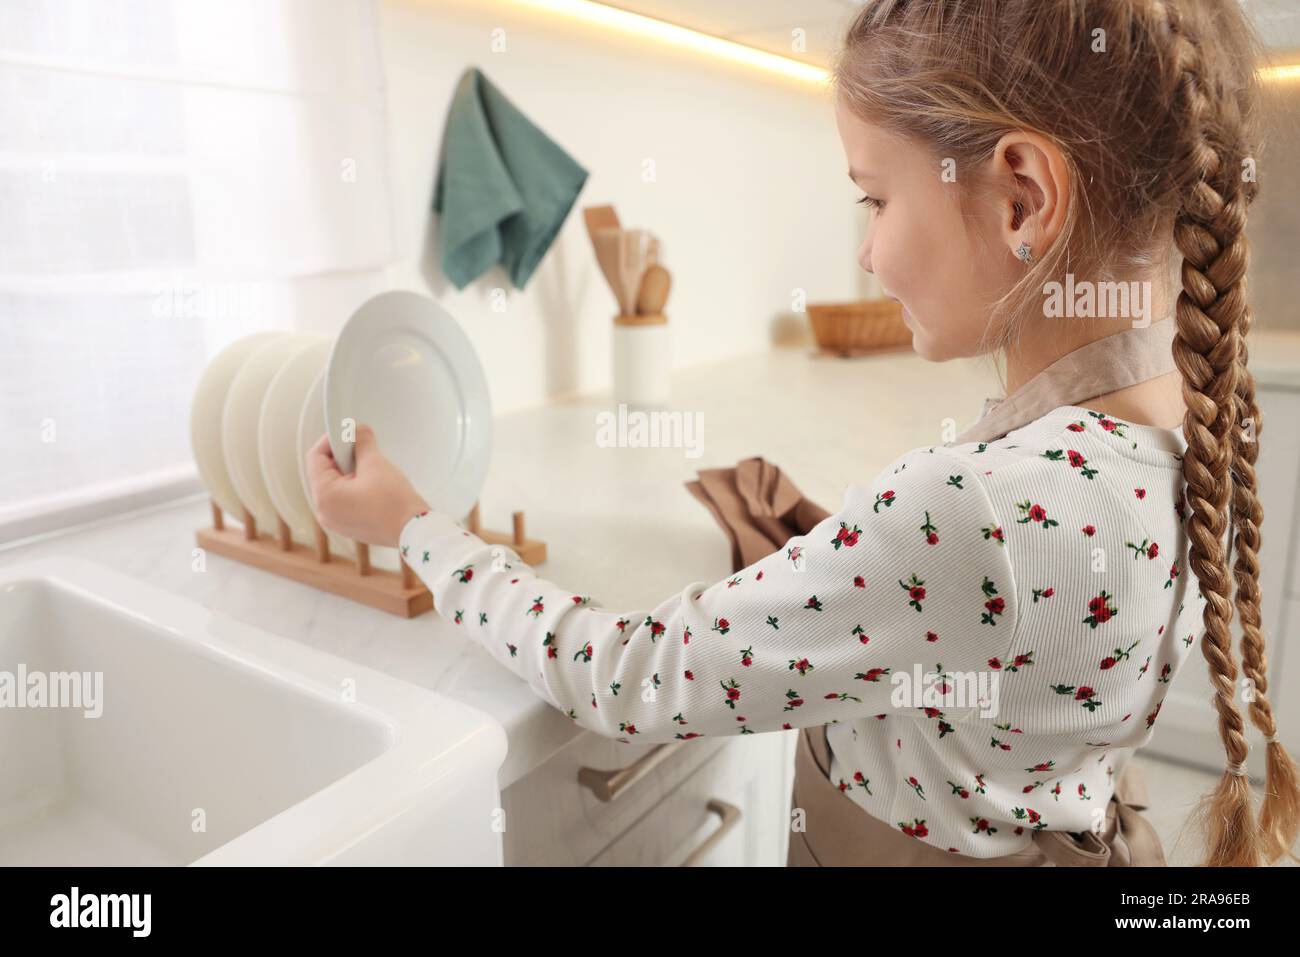 Girl putting clean plate on drying rack in kitchen Stock Photo